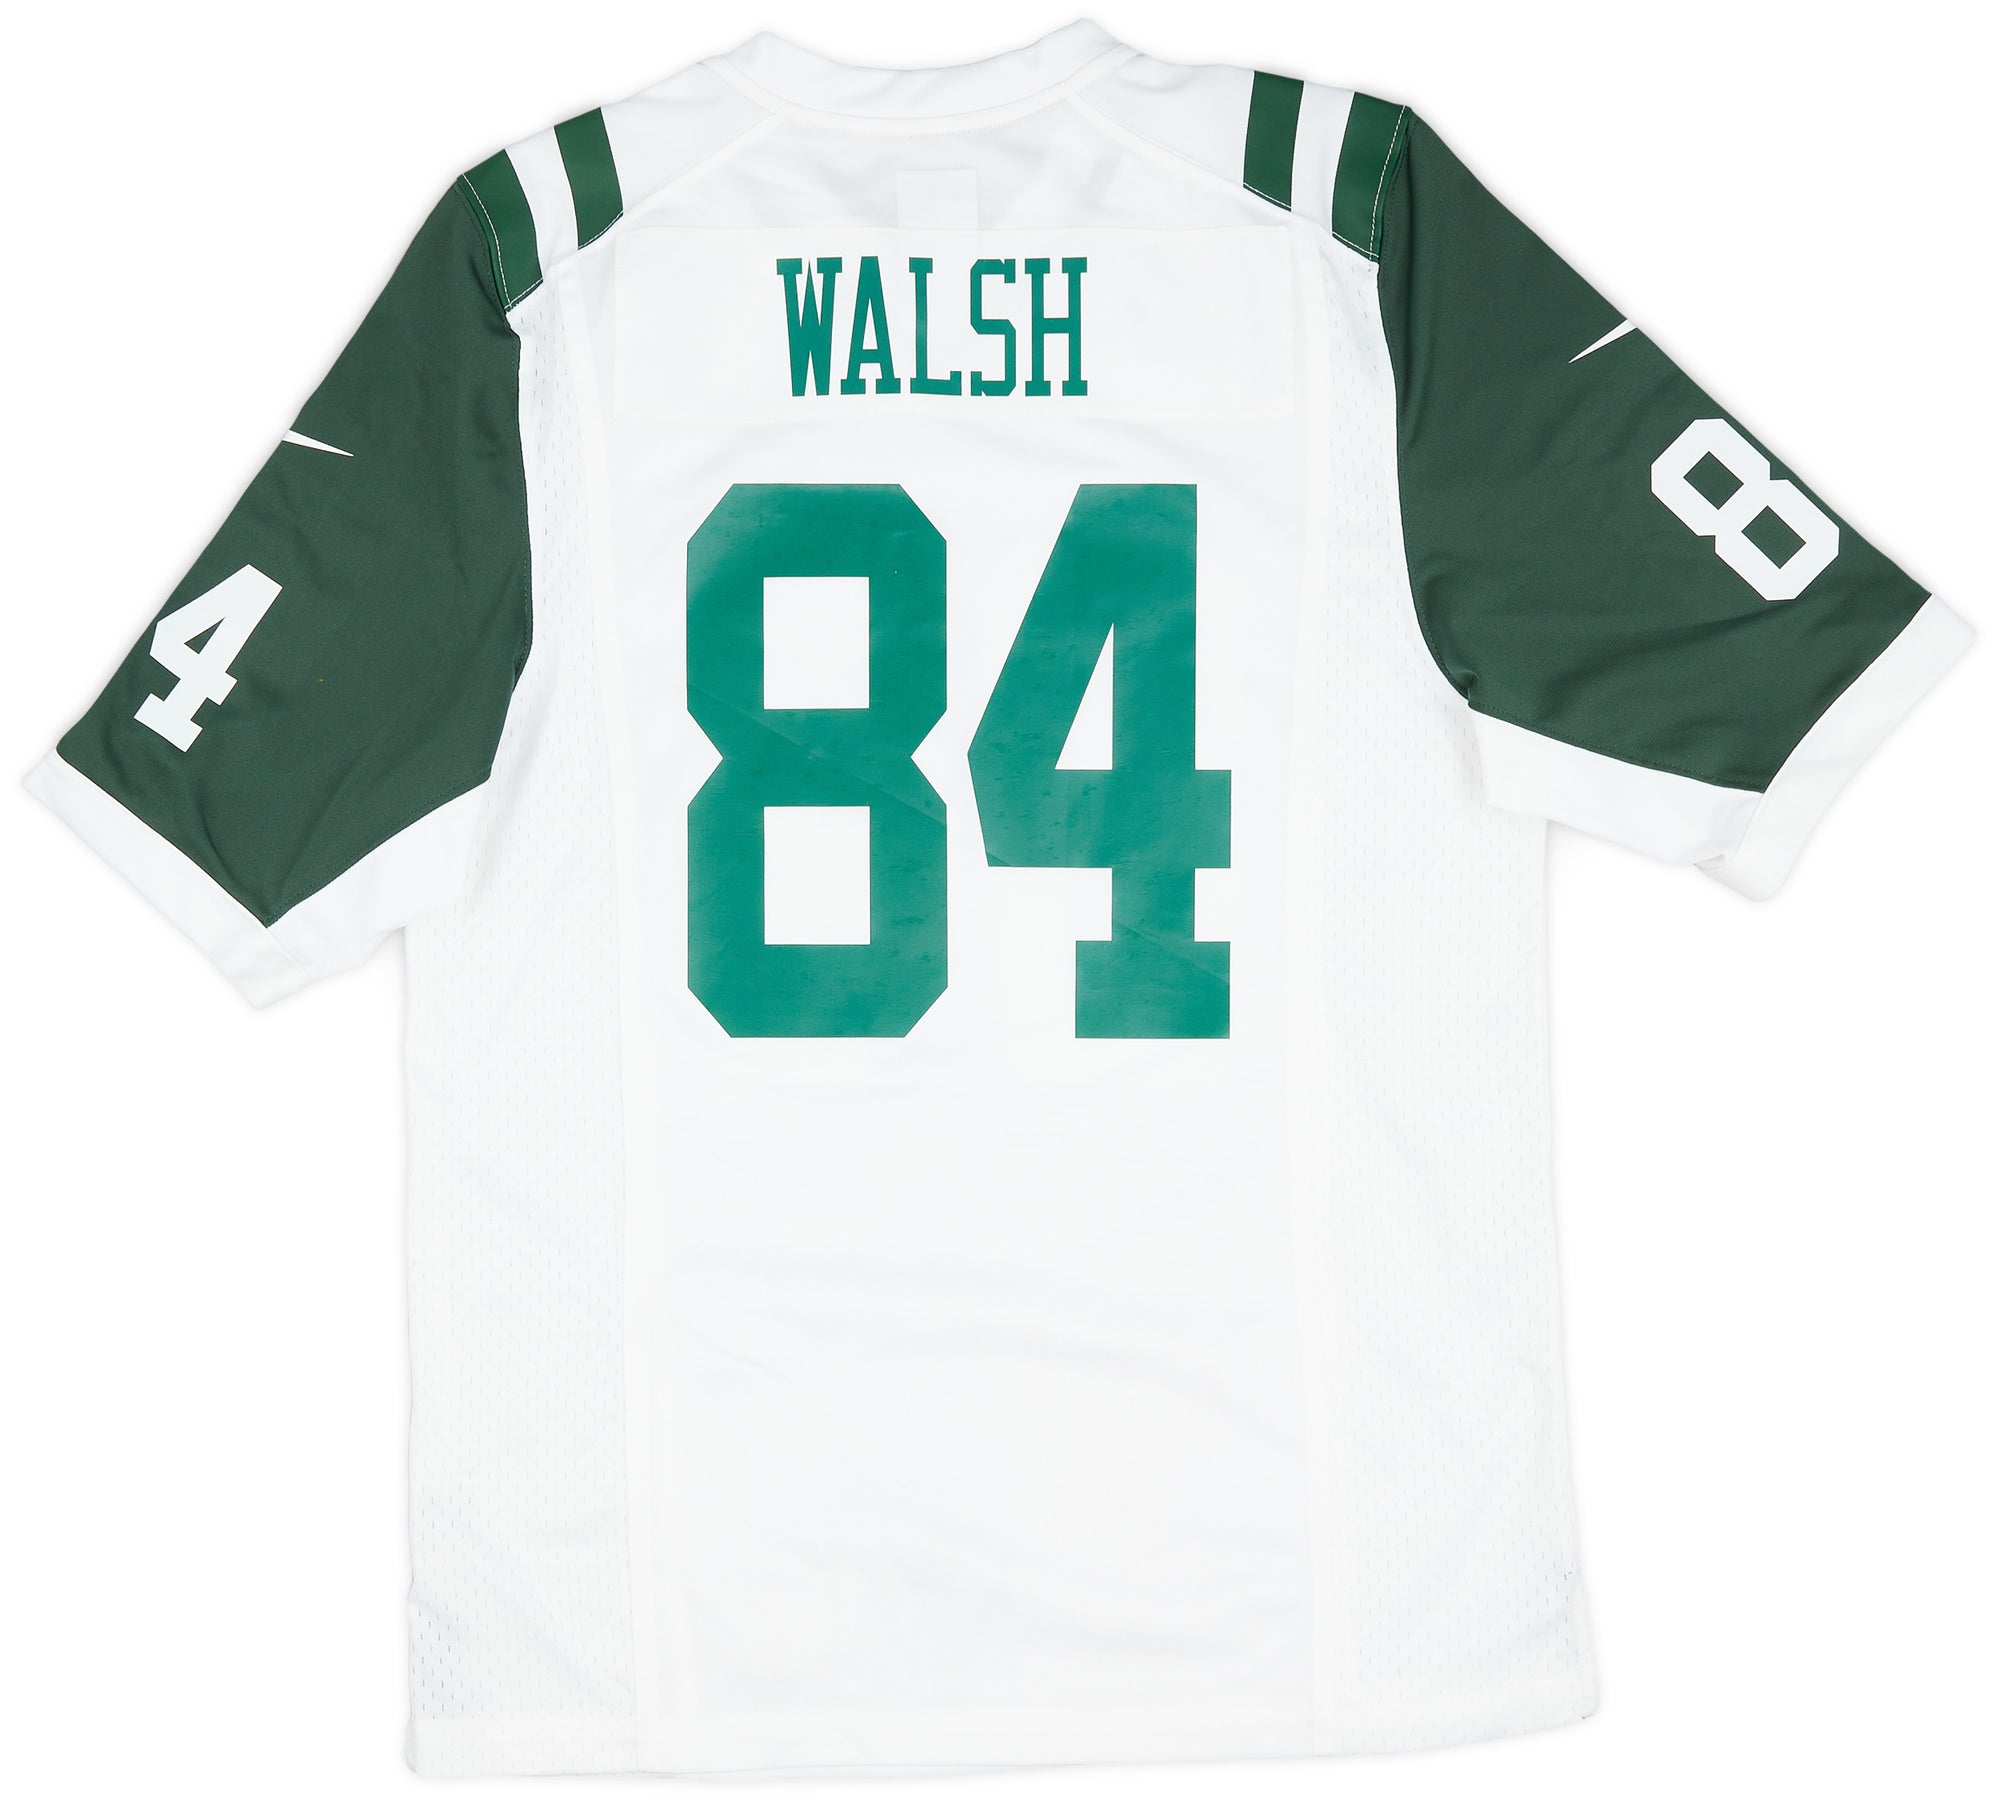 2012-18 NEW YORK JETS WALSH #84 NIKE GAME JERSEY (AWAY) S